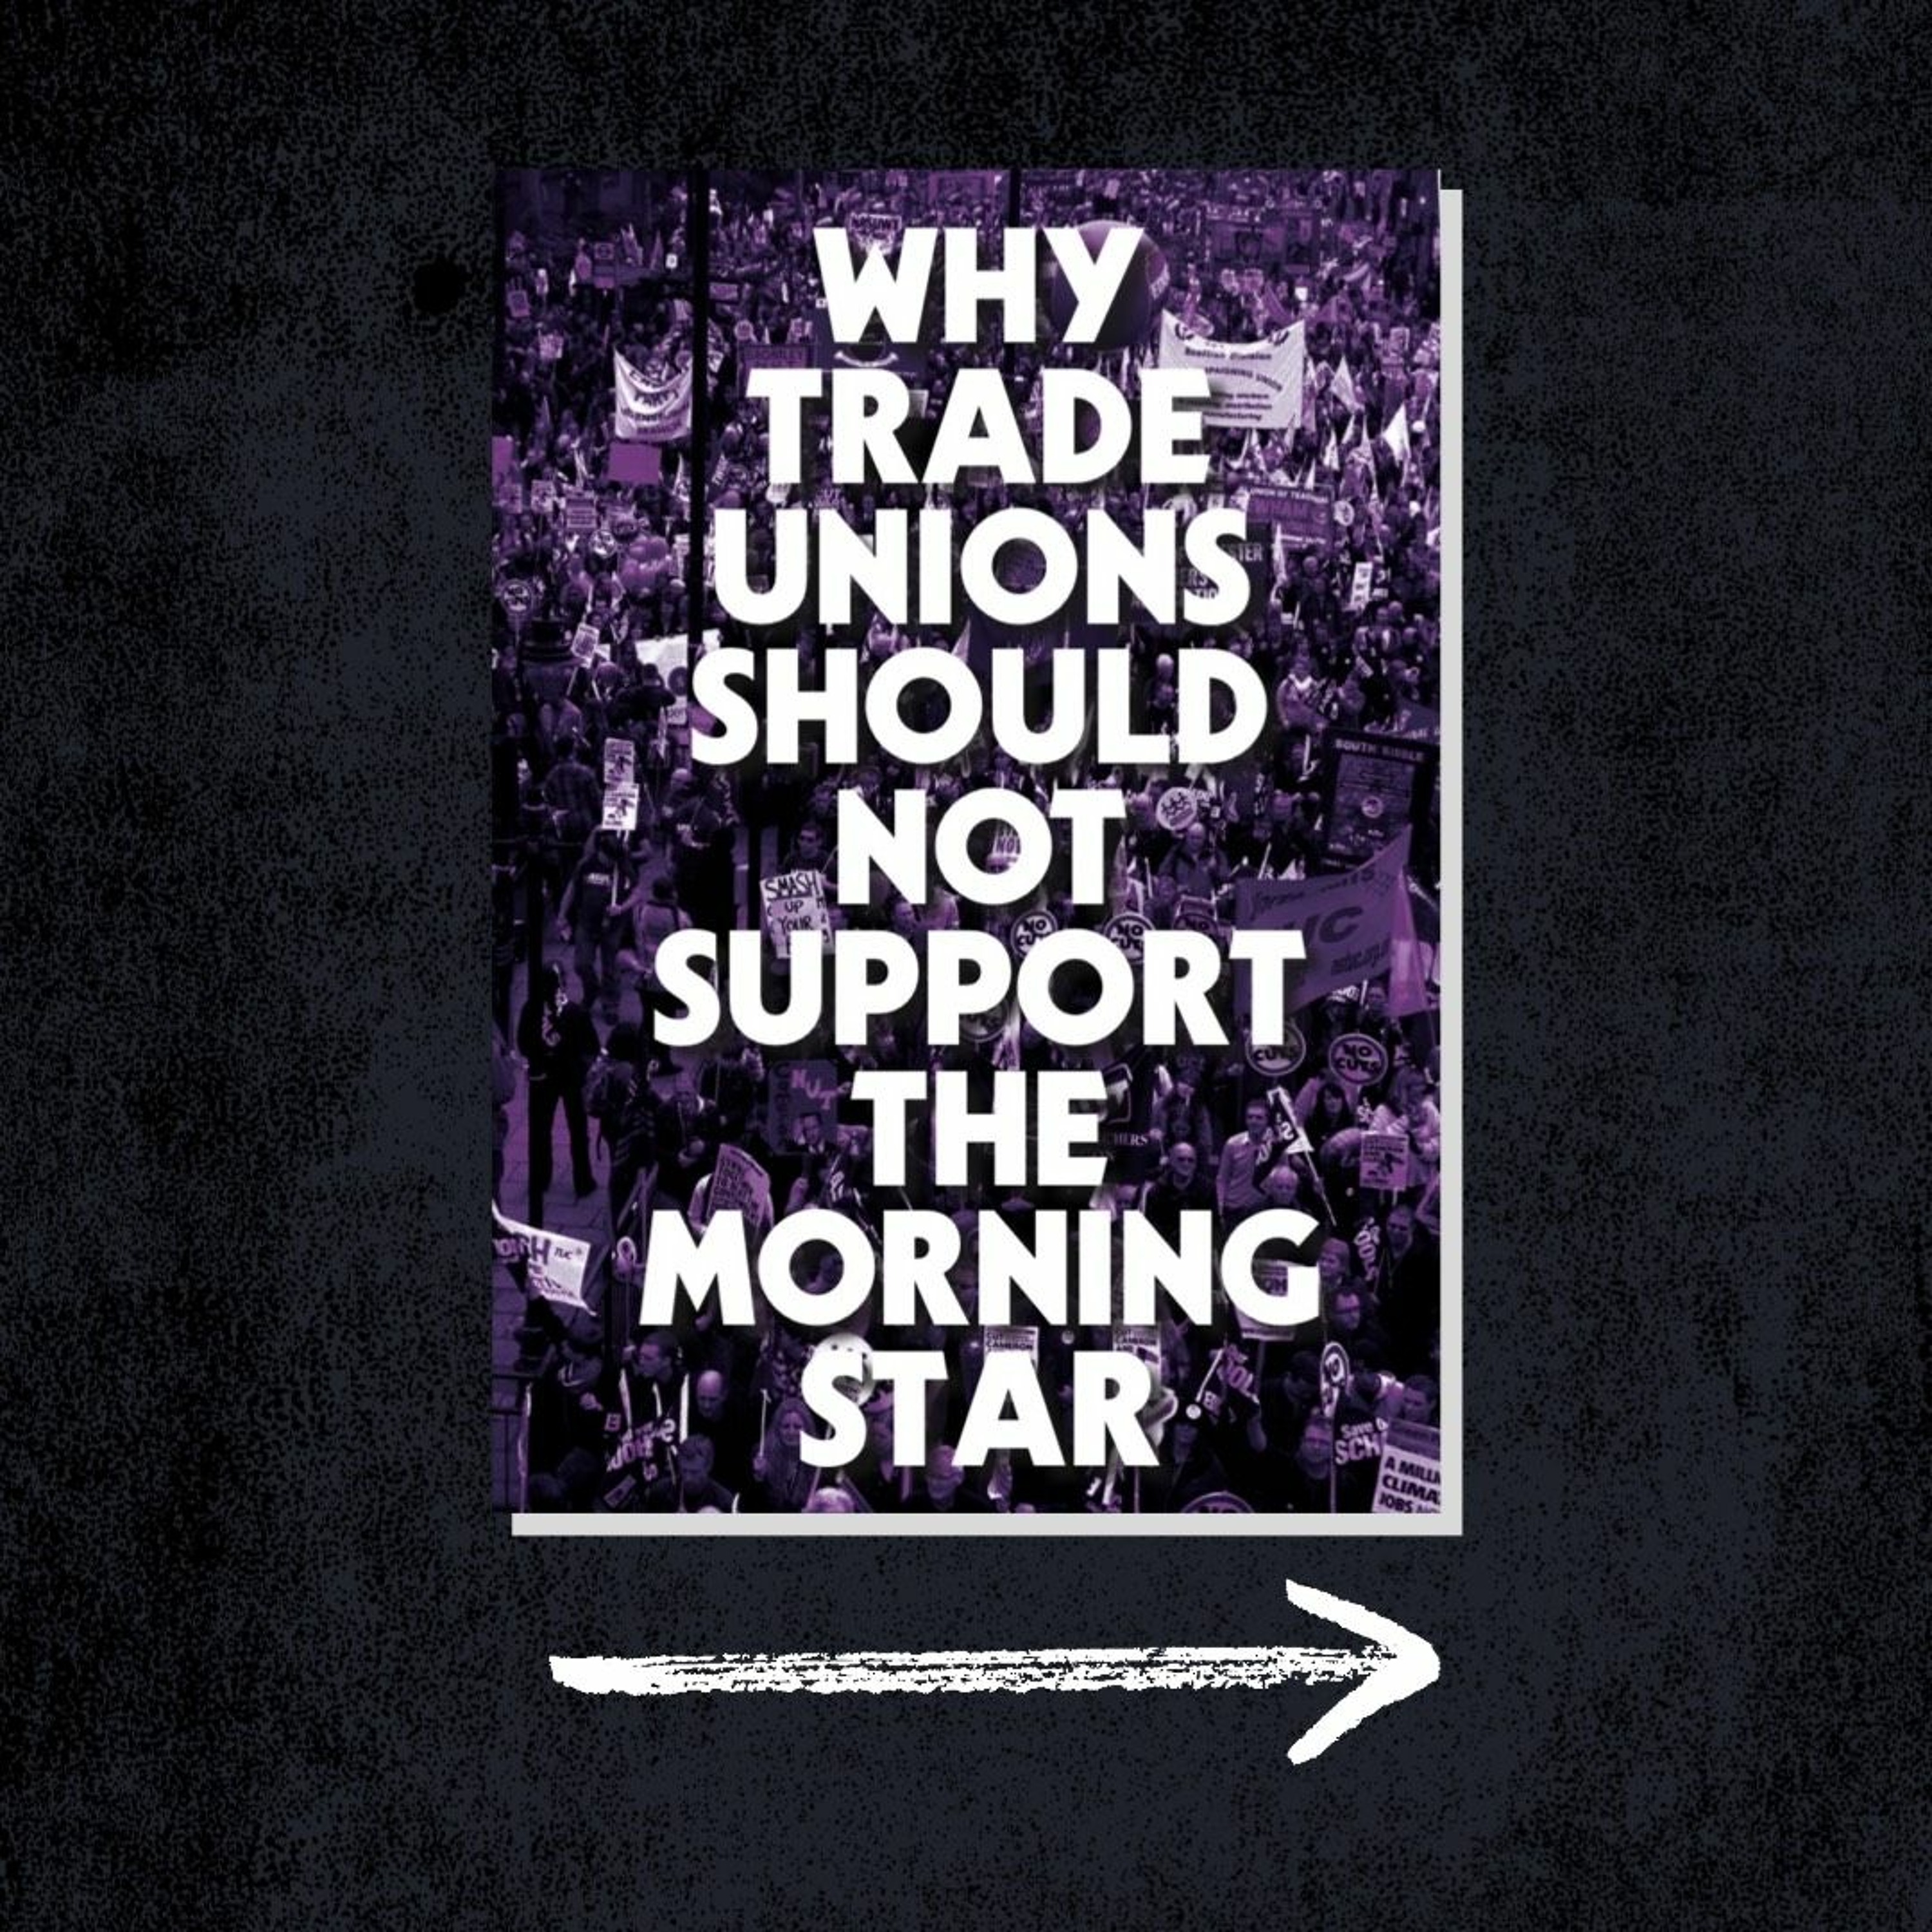 Why trade unions should not support the Morning Star — Pamphlet